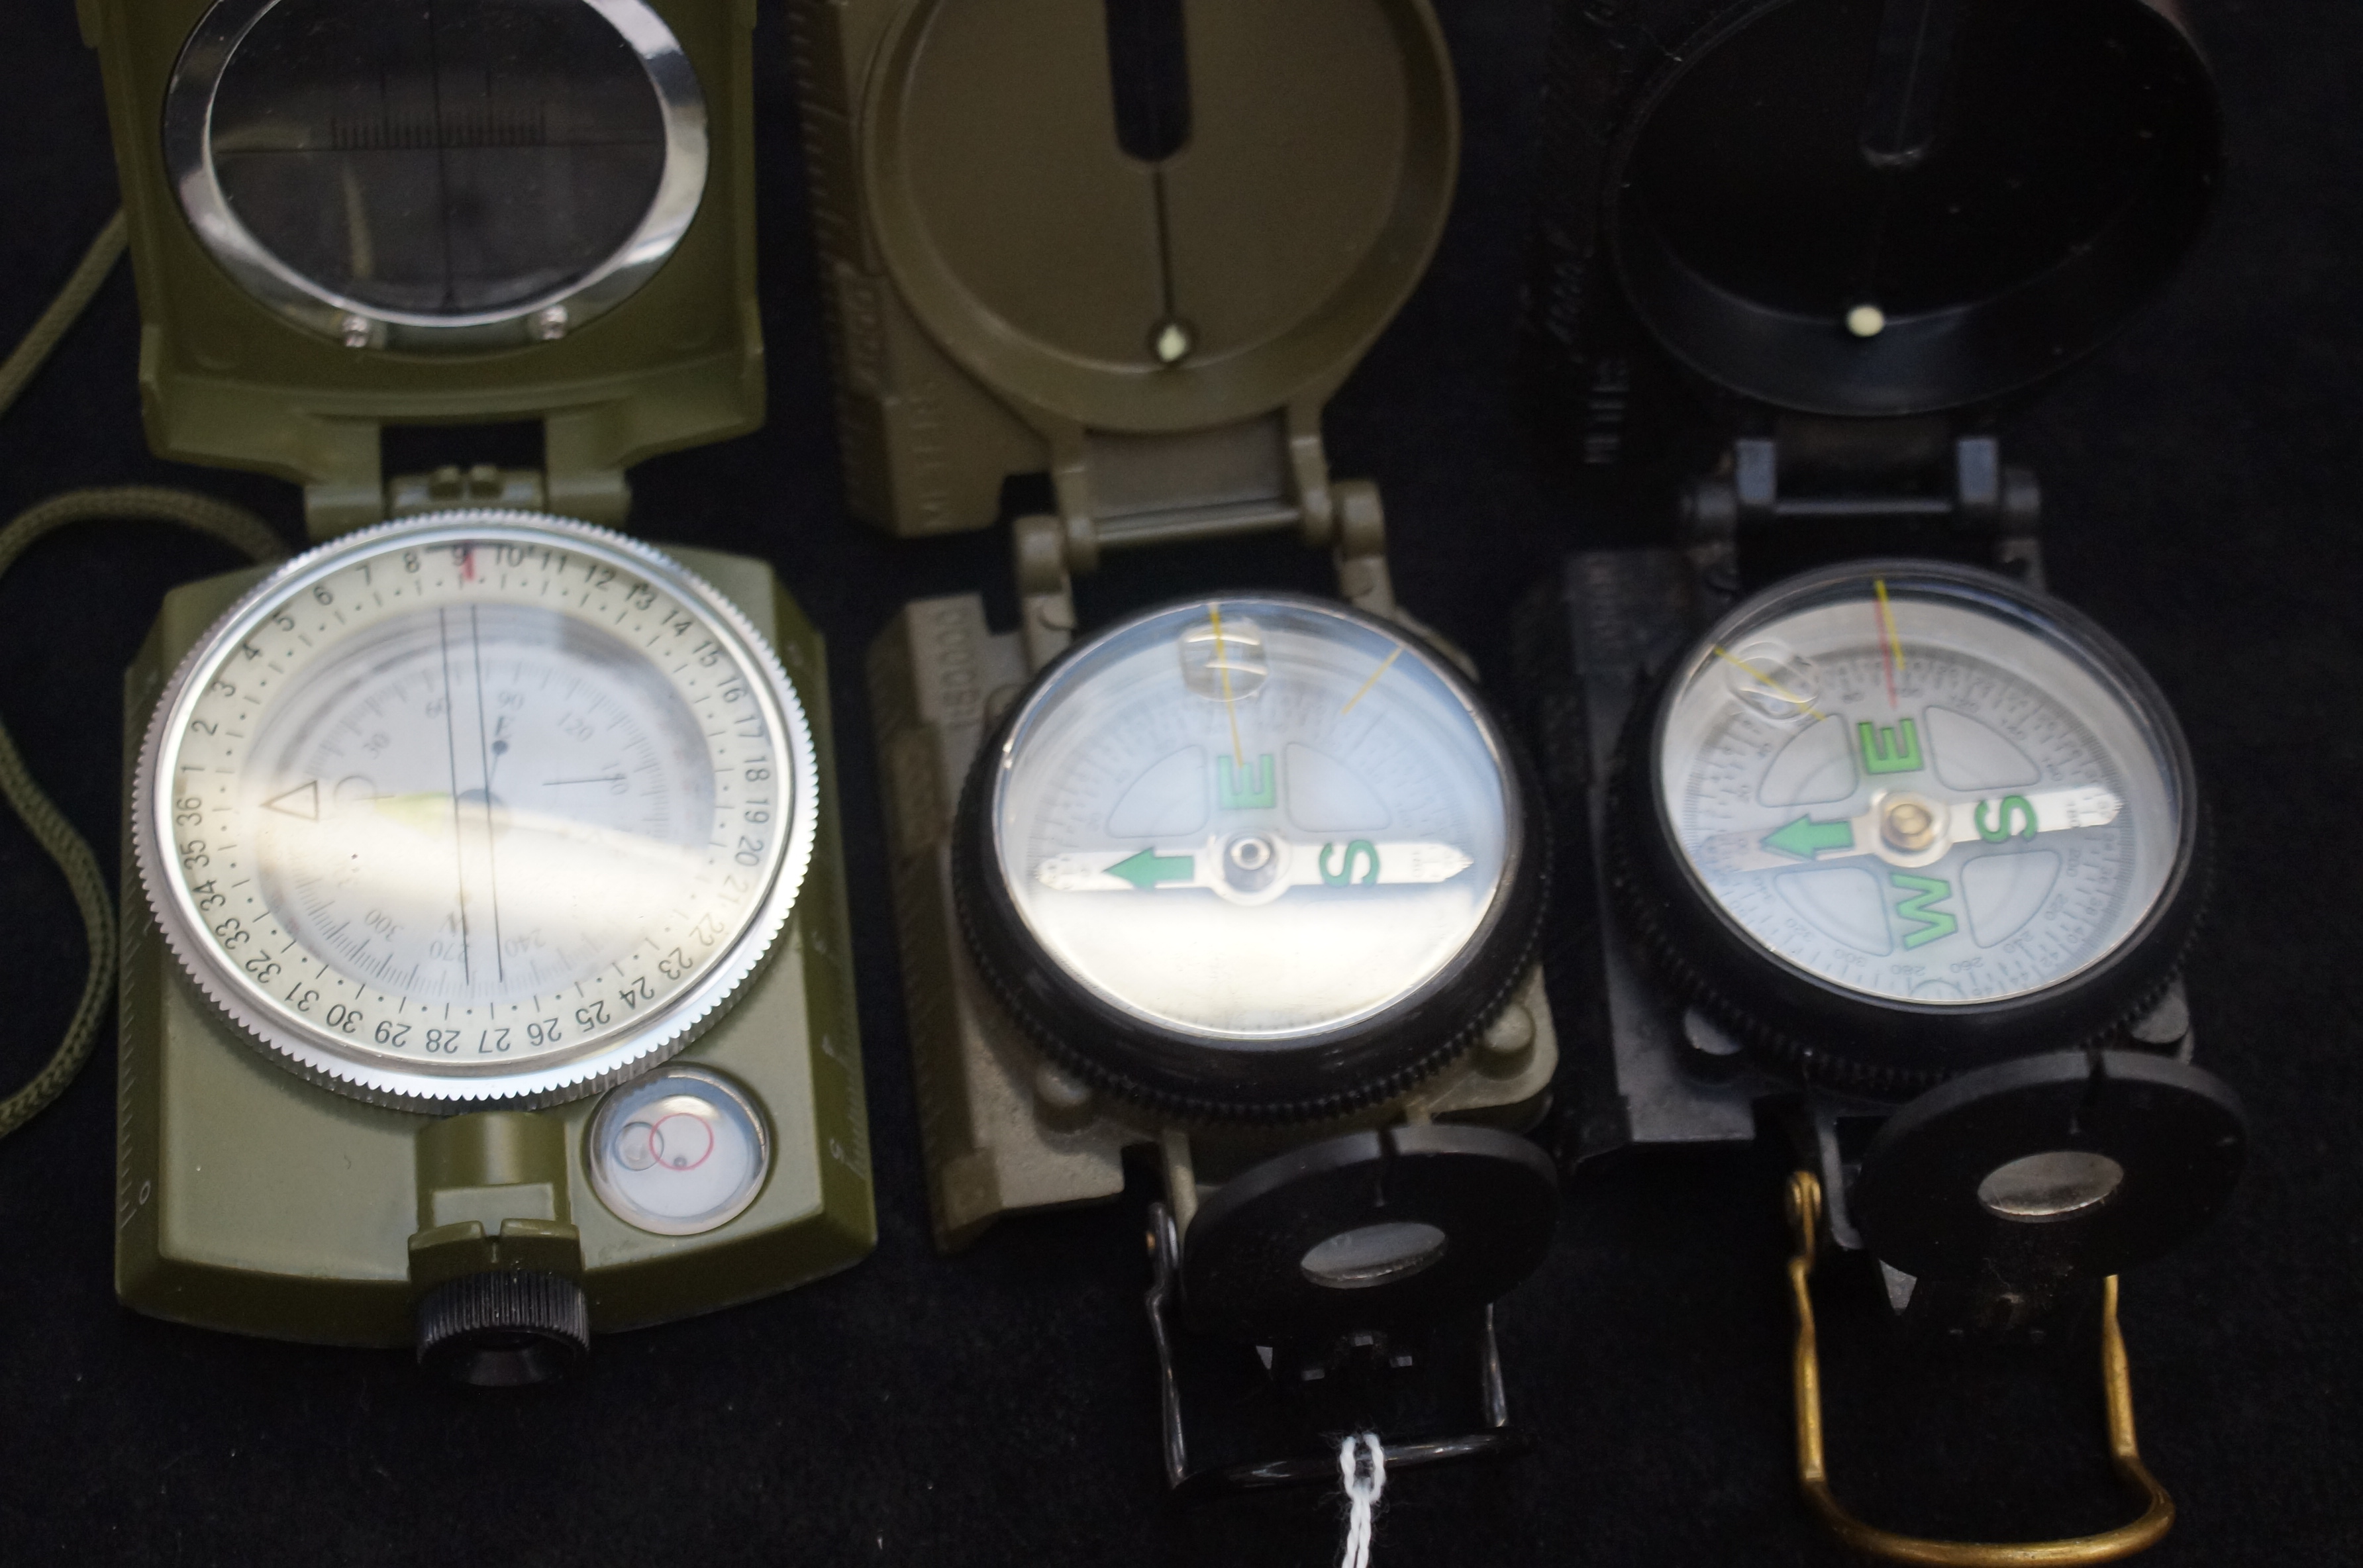 3 Military style compasses